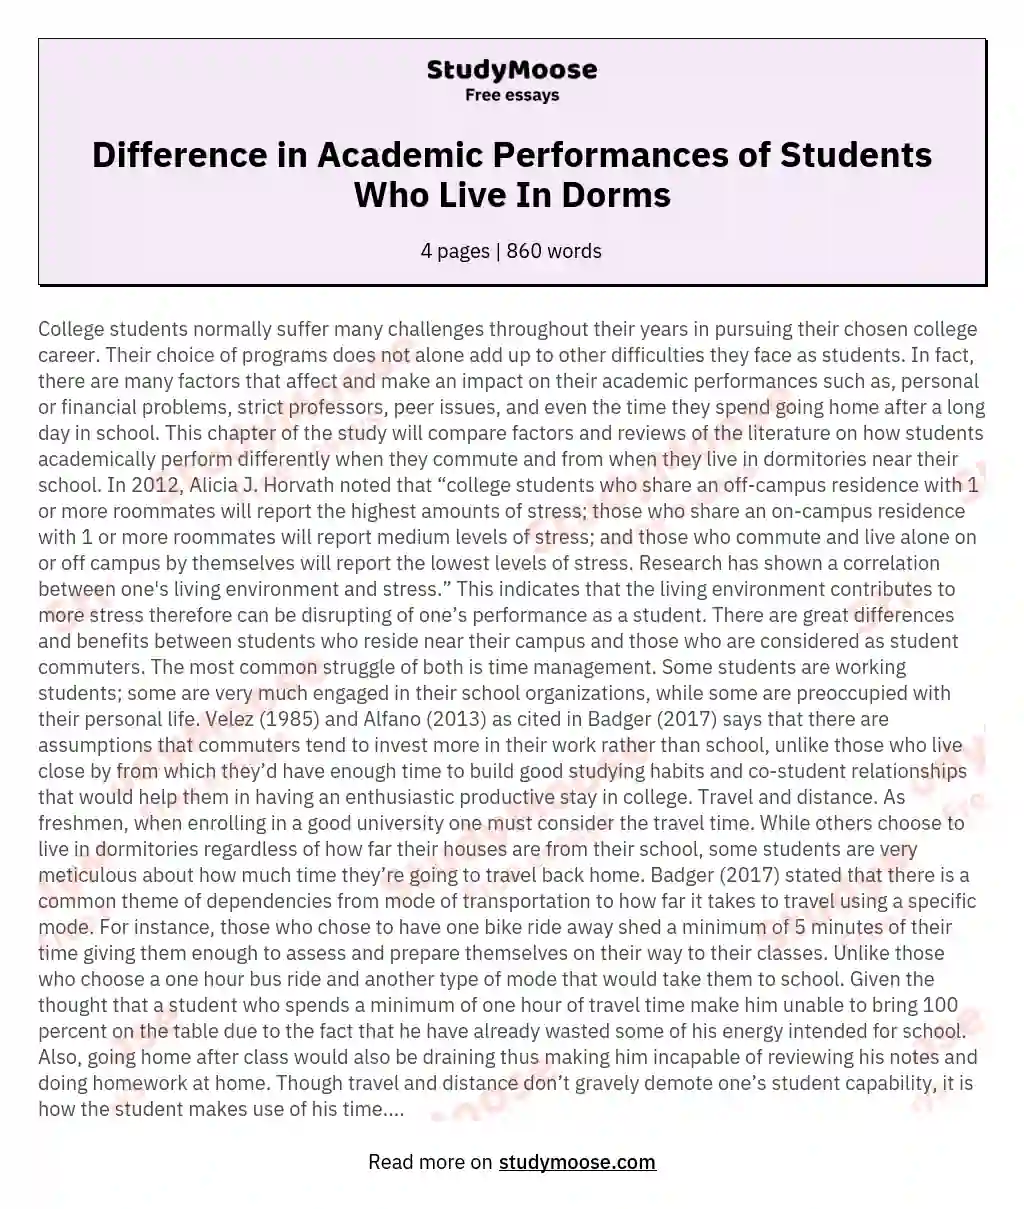 Difference in Academic Performances of Students Who Live In Dorms